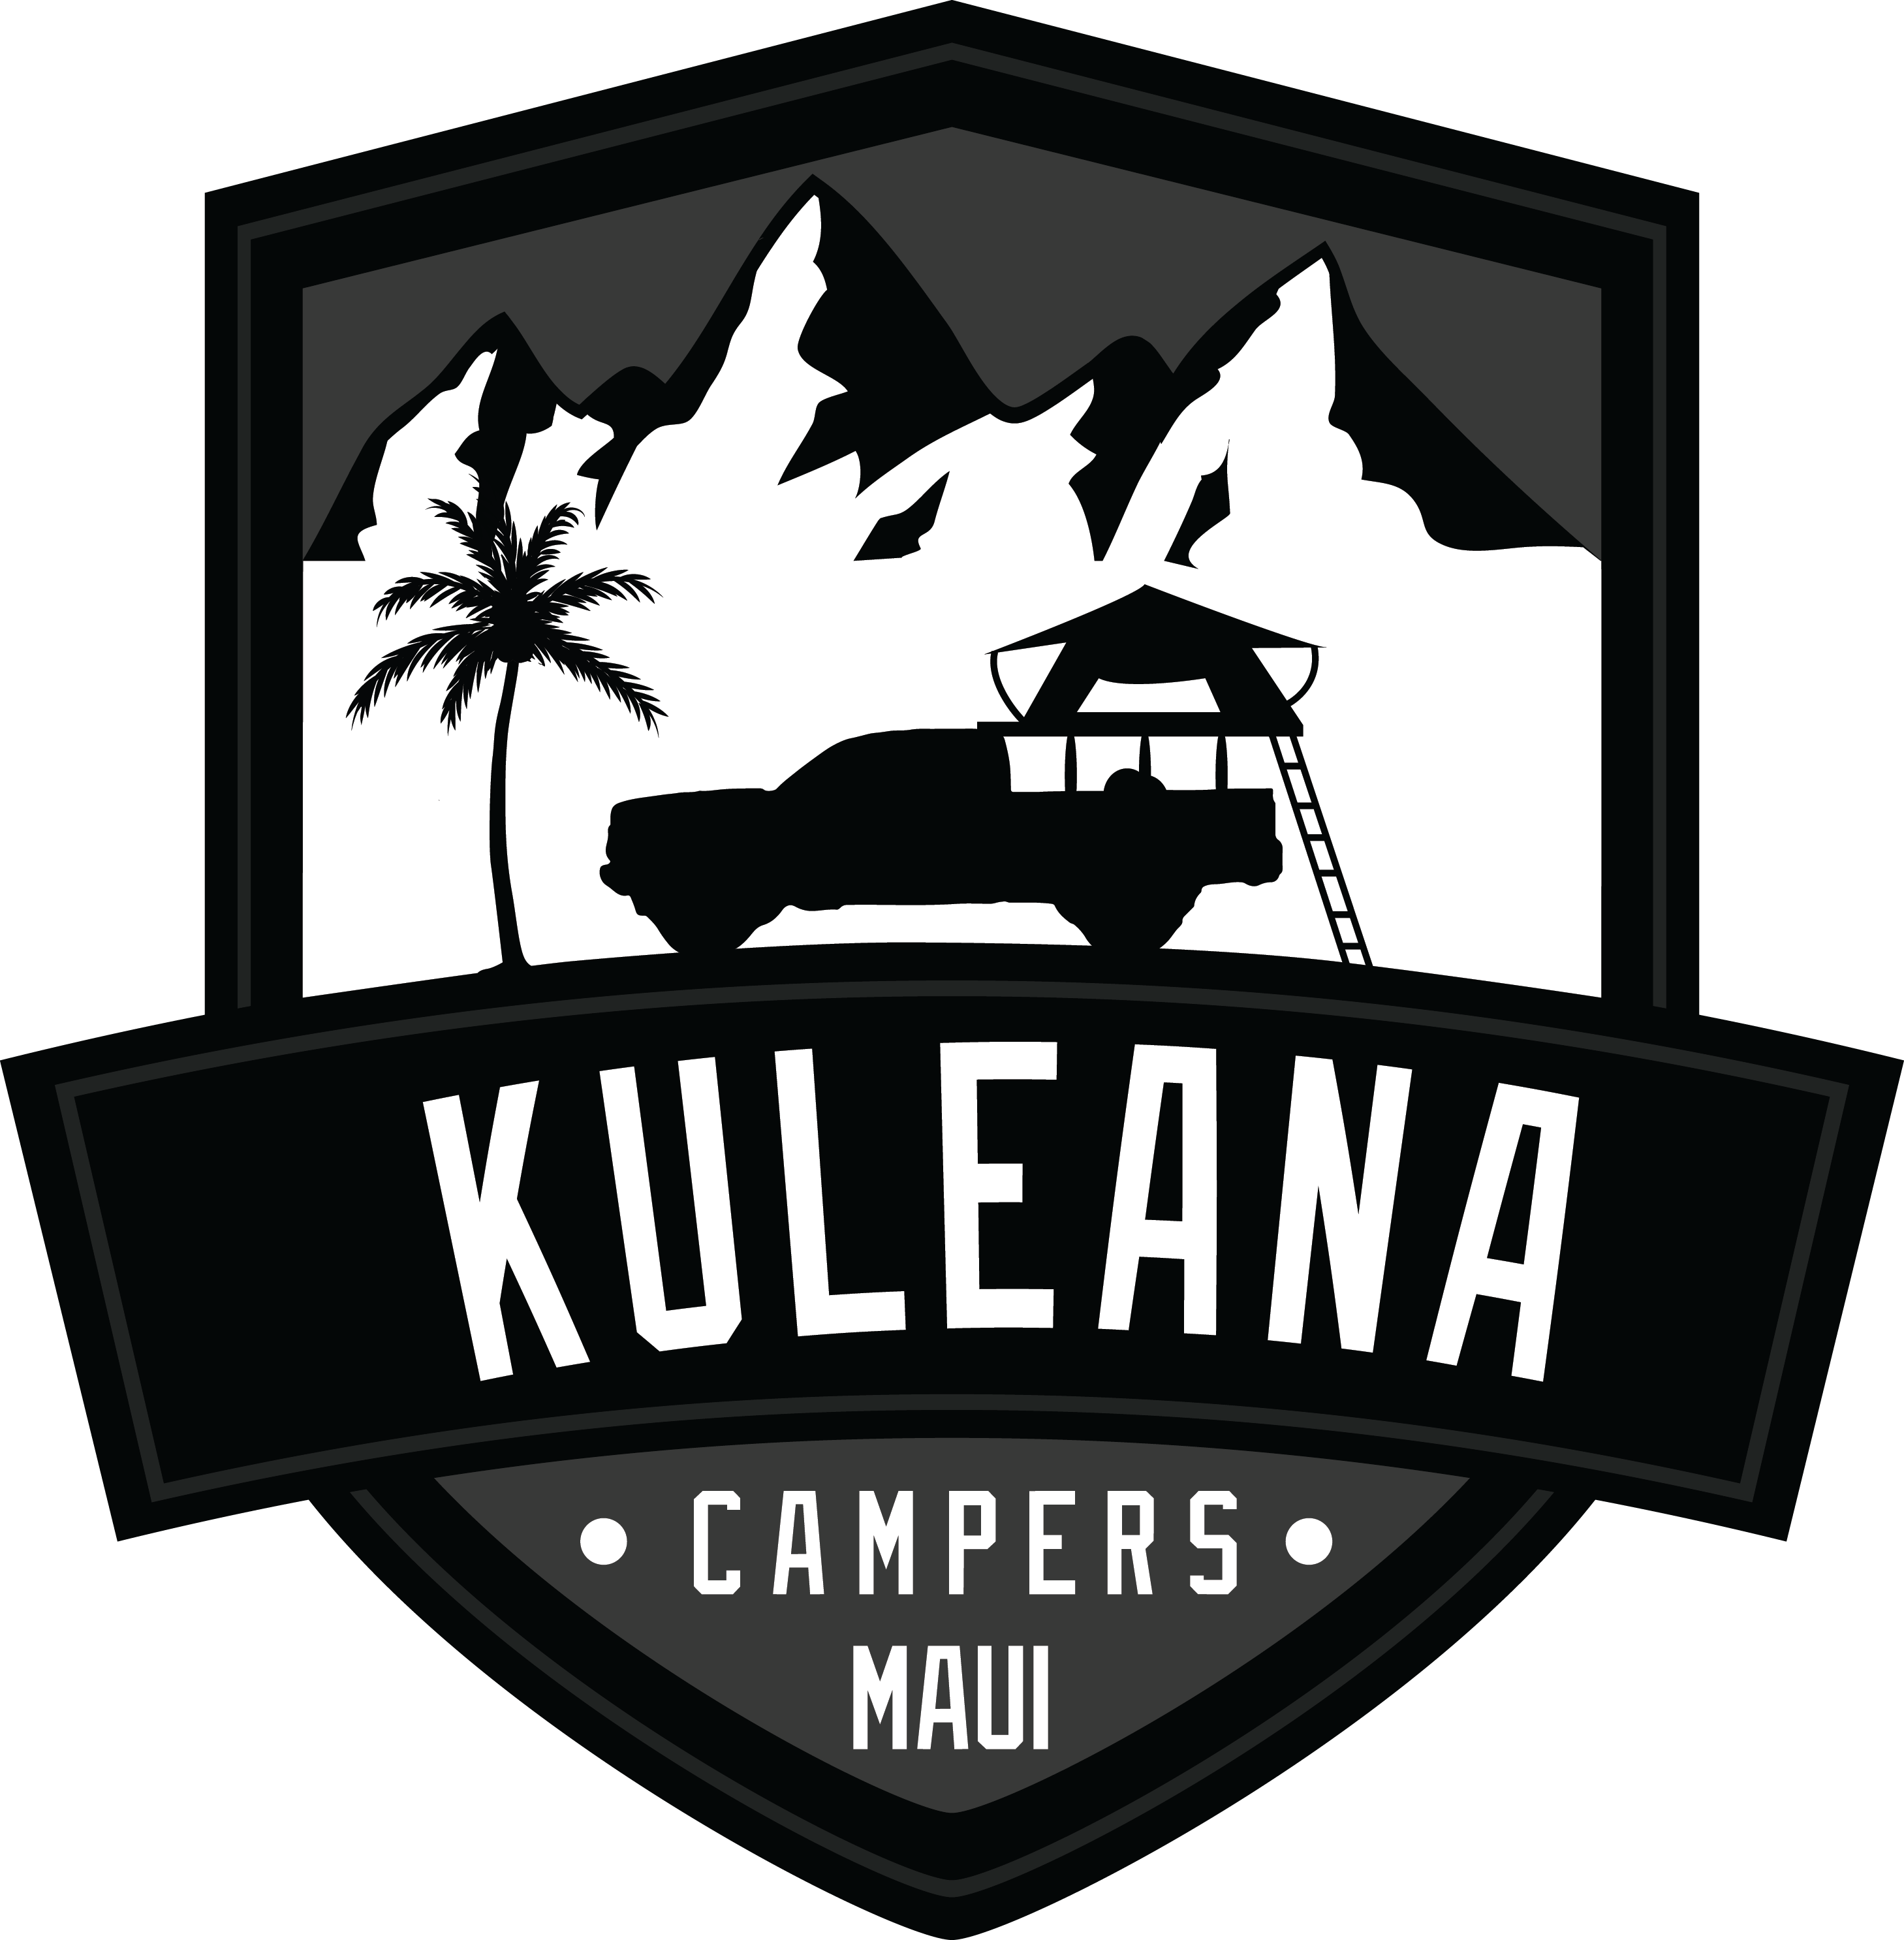 Kuleana Campers Maui, Monday, May 6, 2019, Press release picture